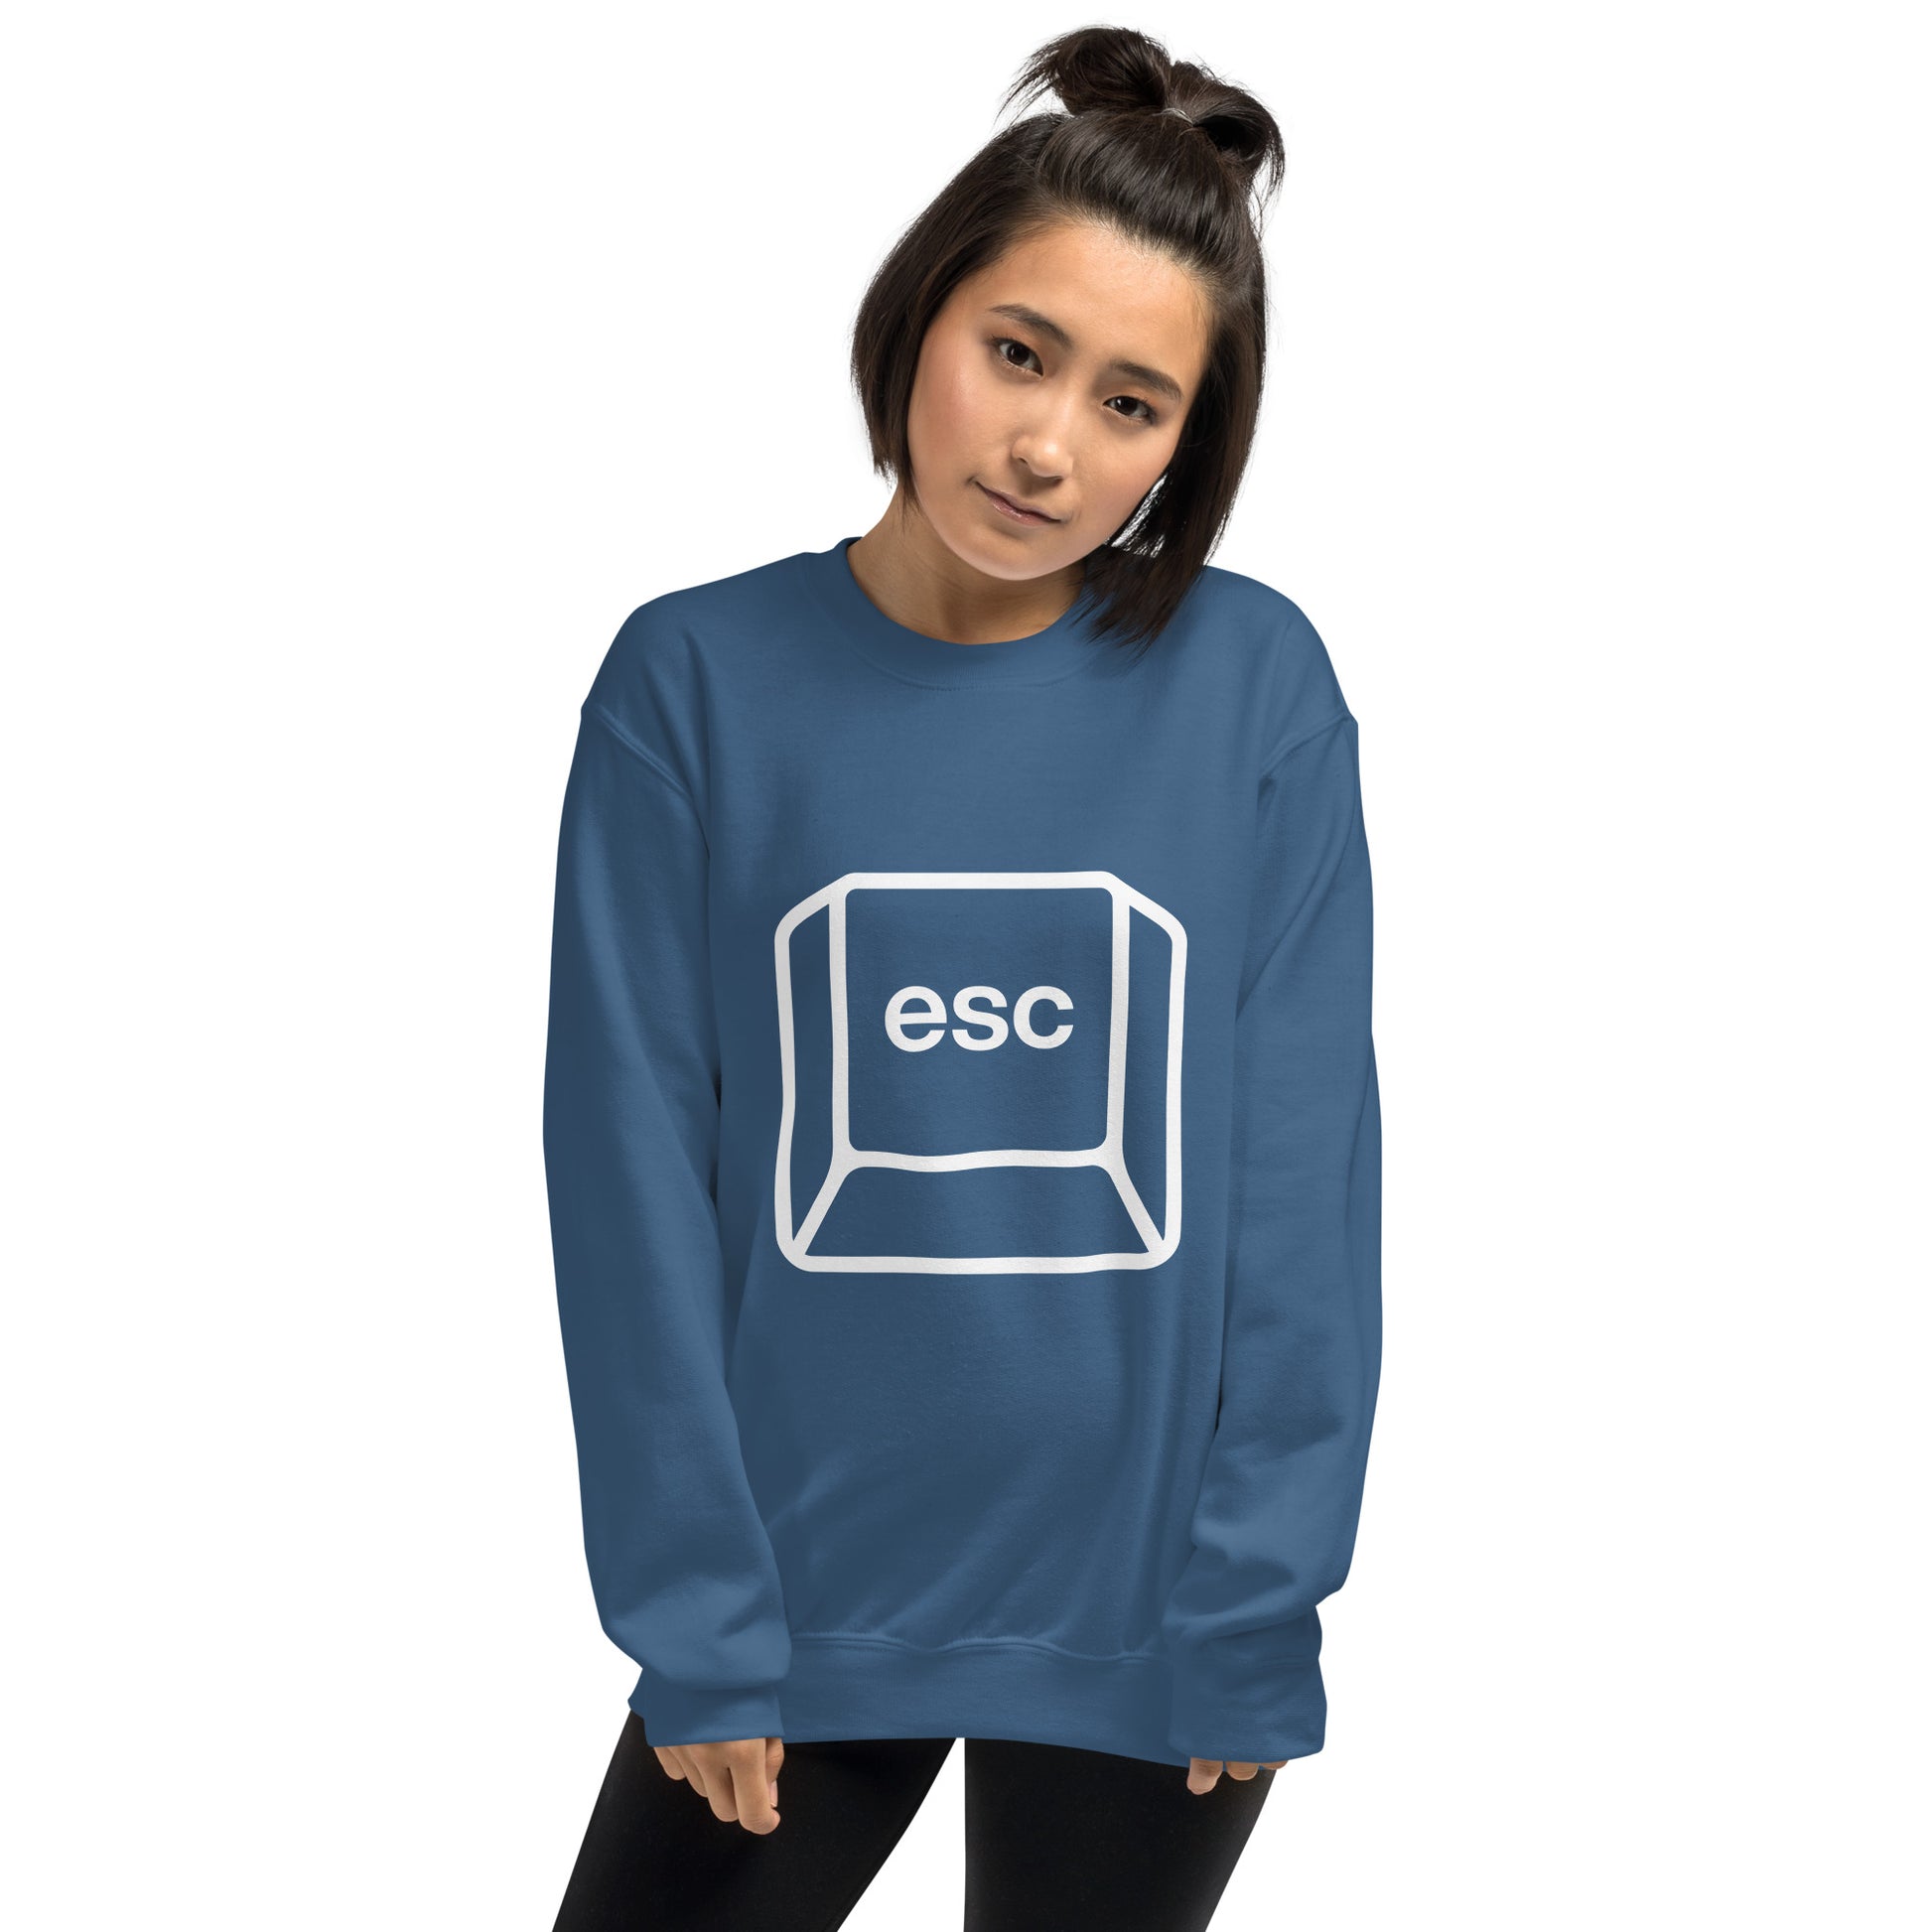 Woman with indigo blue sweatshirt with picture of esc key